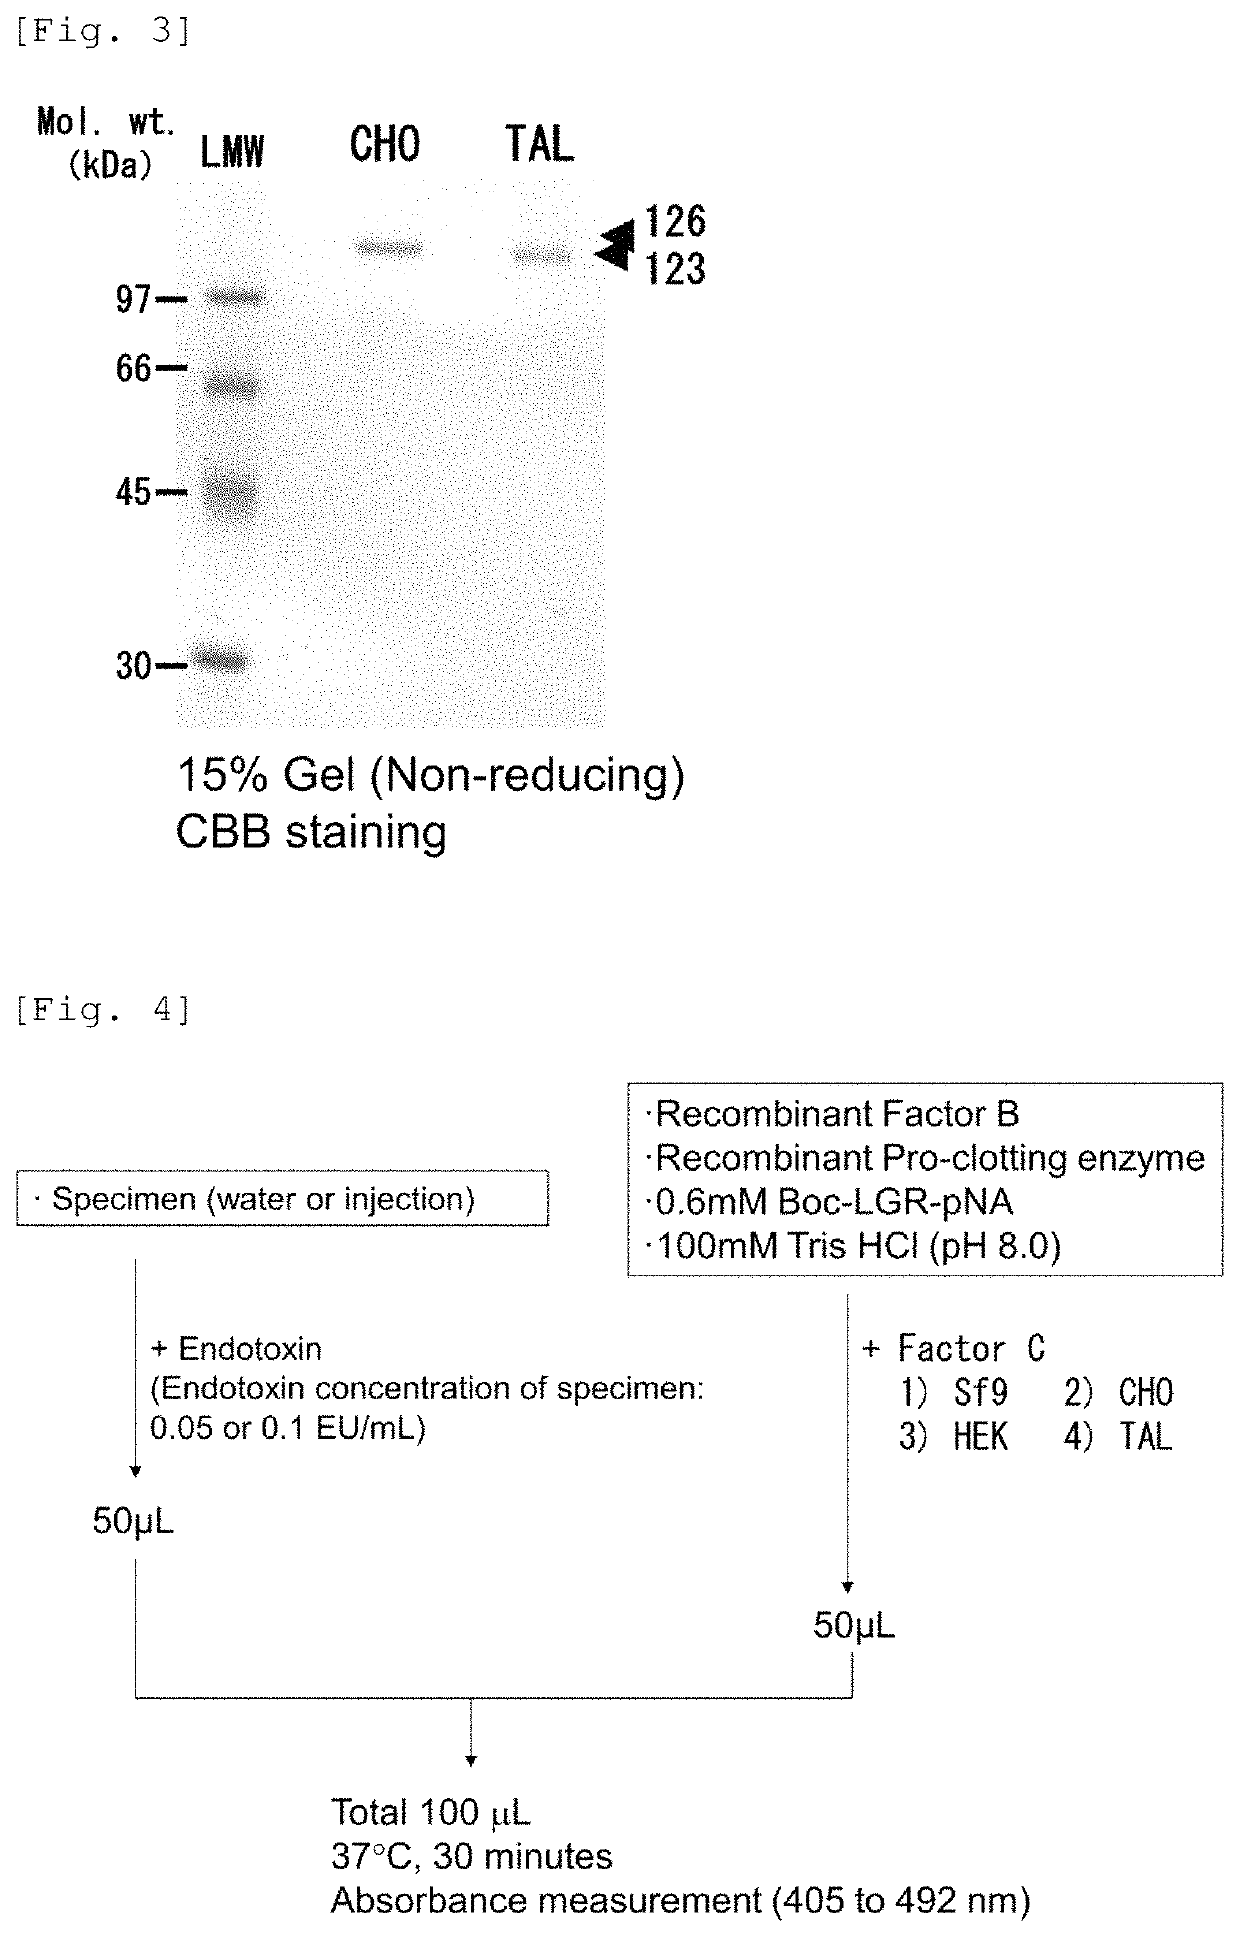 Recombinant Factor C and method for producing the same, and method for measuring endotoxin